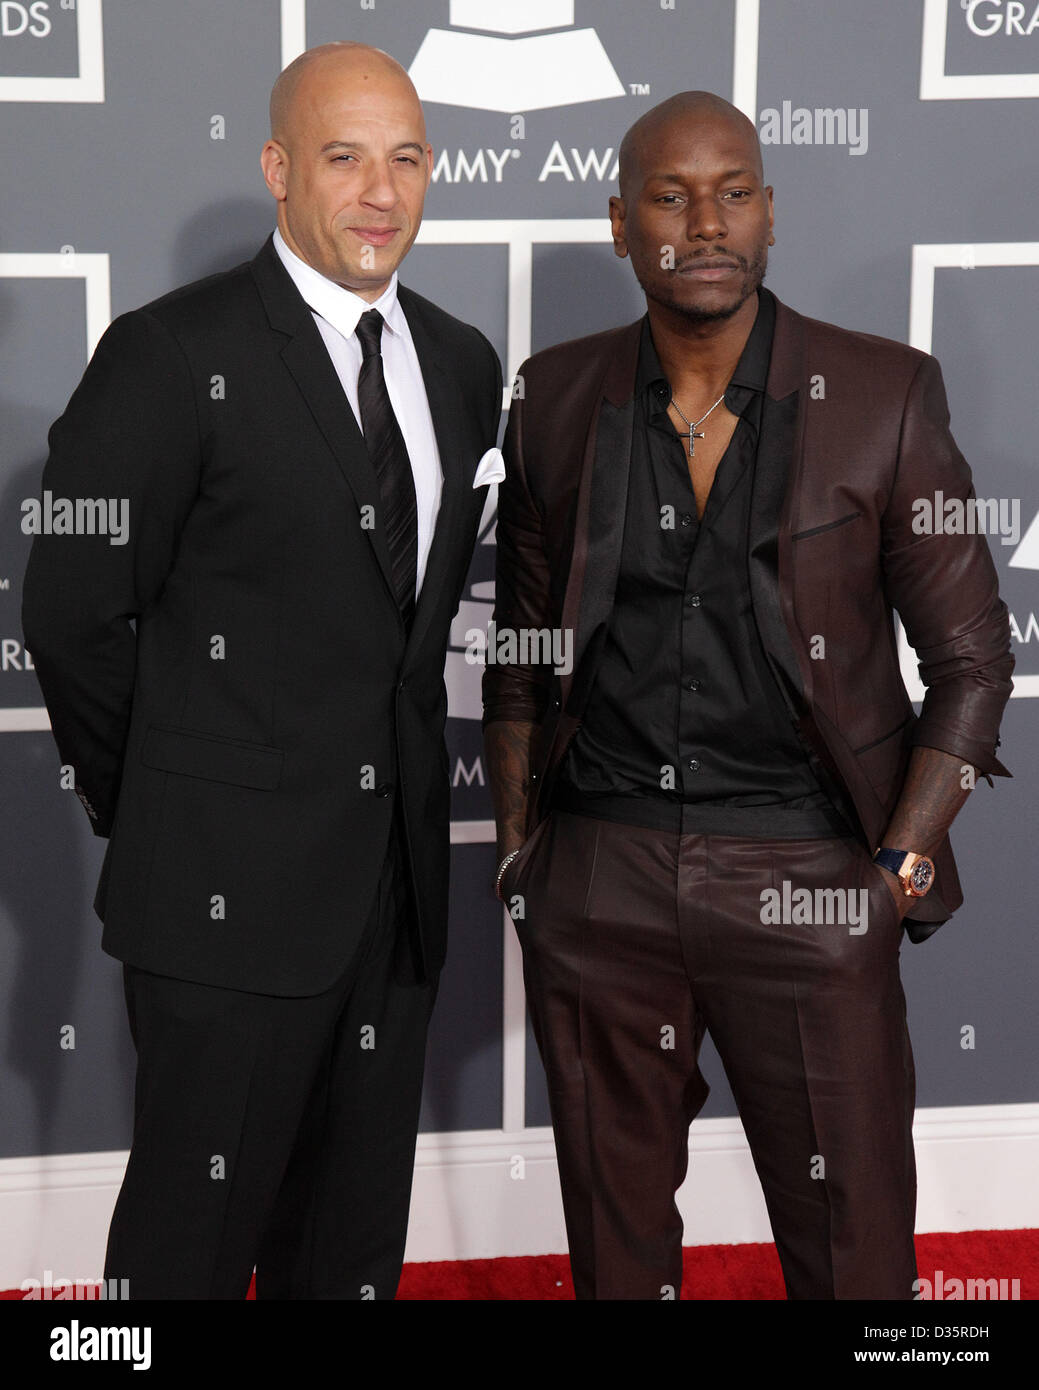 Los Angeles, California, USA. 10th February 2013.  Vin Diesel & Tyrese Gibson arrives for the 2013 Grammy Awards at Staples Center. (Credit Image: Credit:  Lisa O'Connor/ZUMAPRESS.com/Alamy Live News) Stock Photo